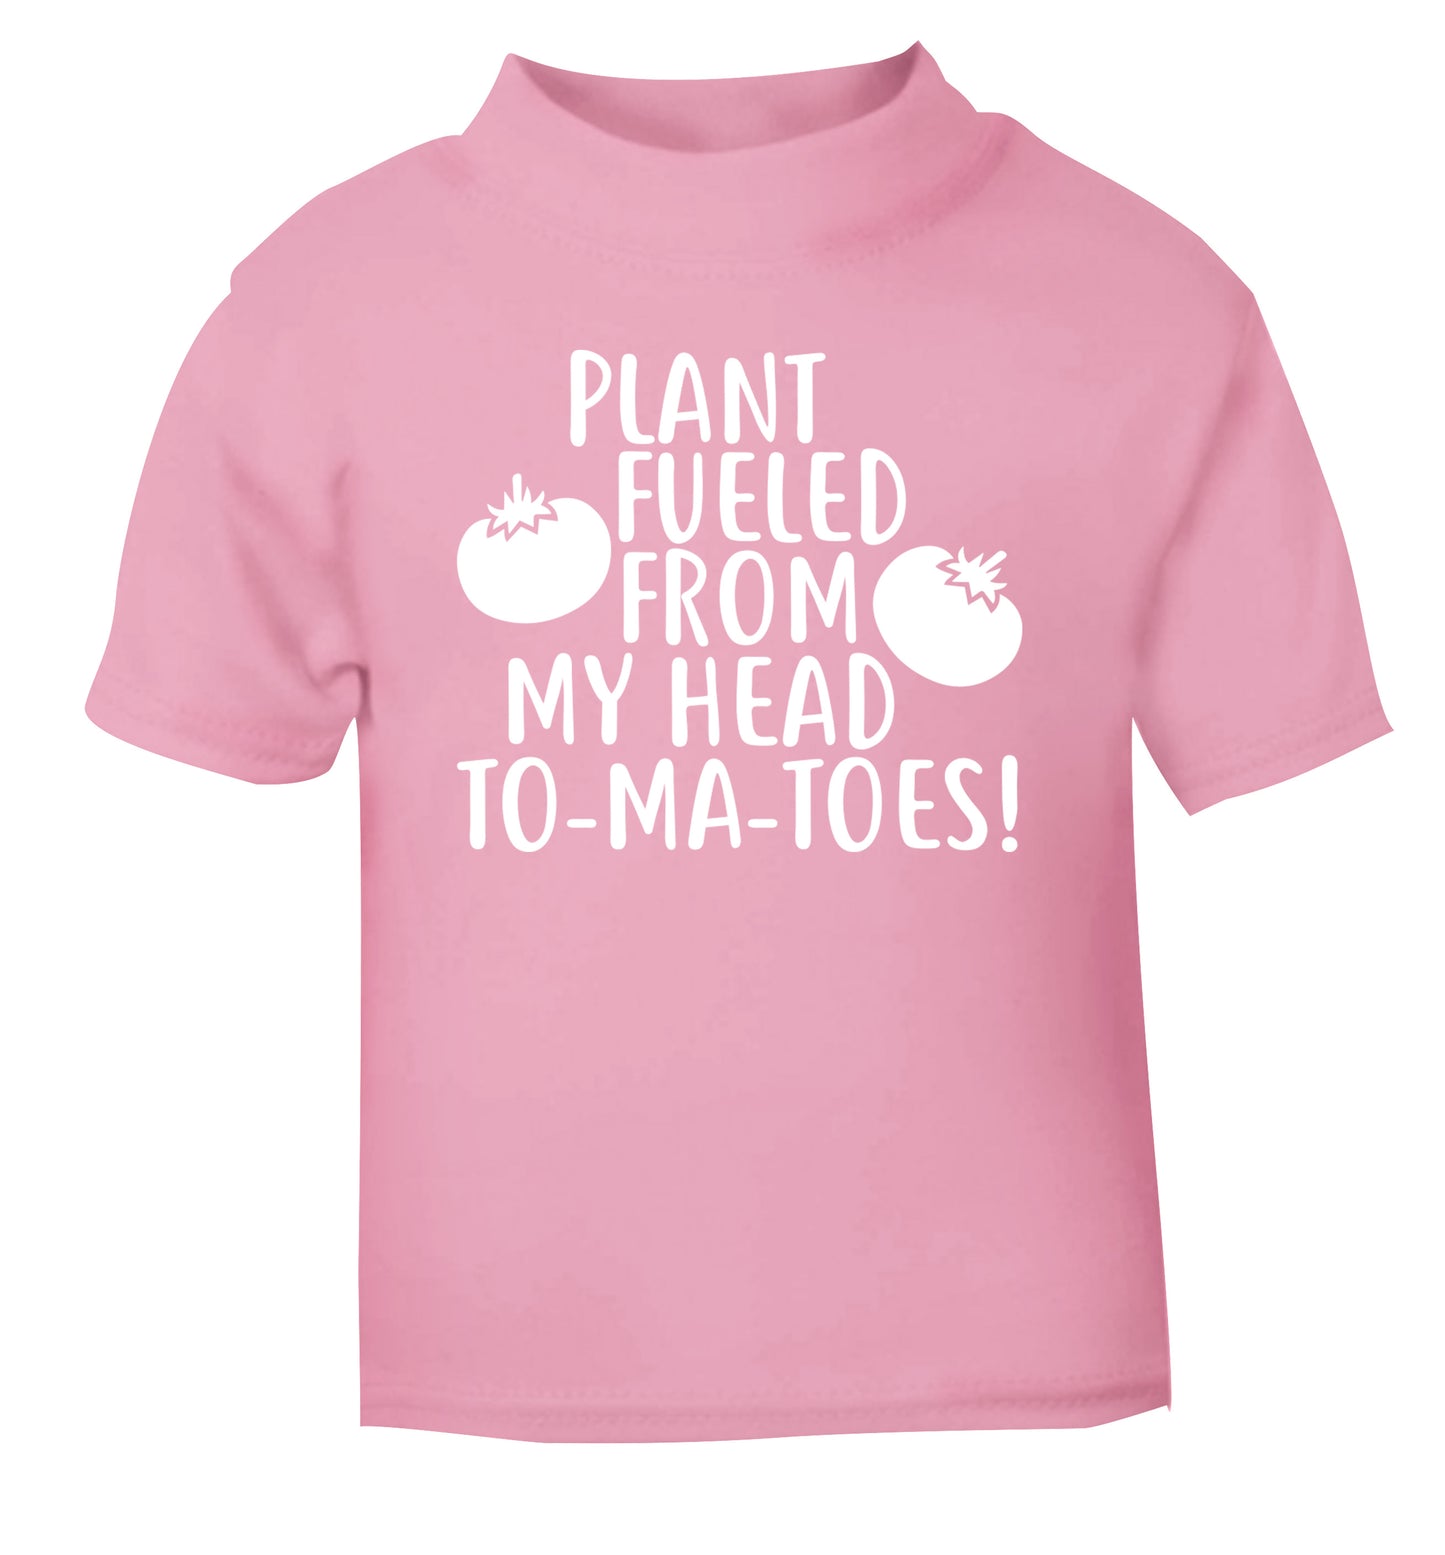 Plant fueled from my head to-ma-toes light pink Baby Toddler Tshirt 2 Years